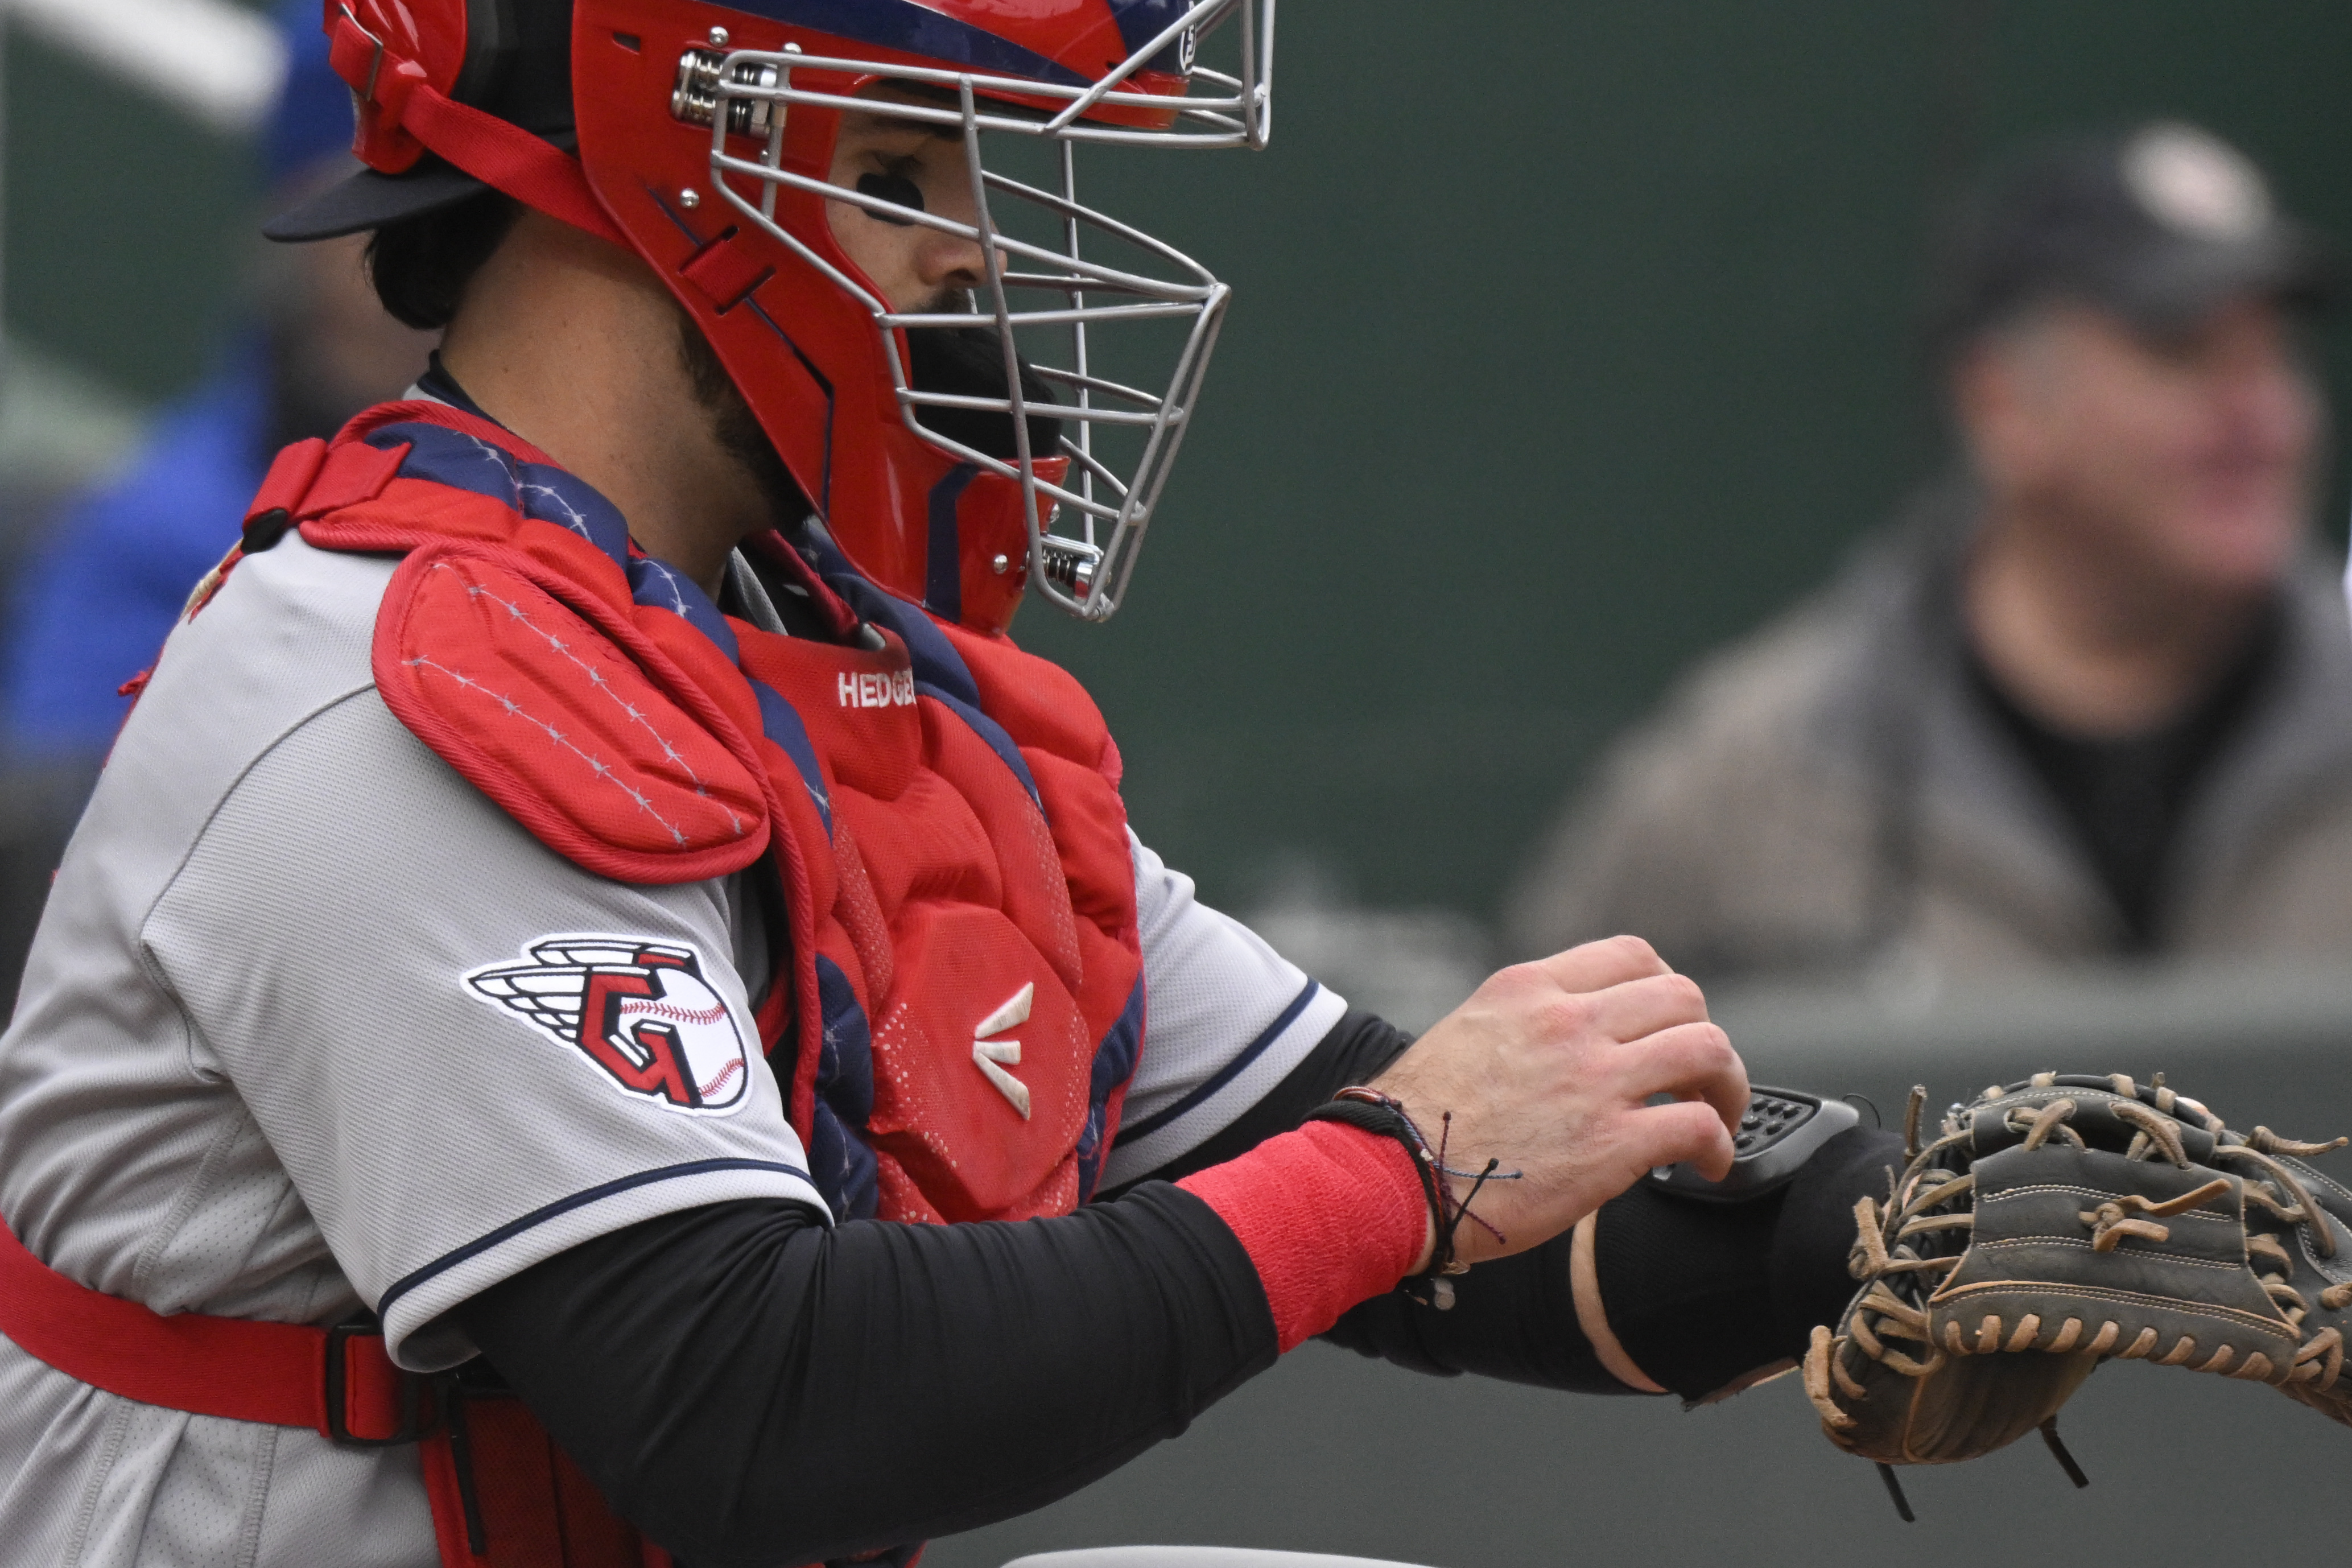 What Pros Wear: What Gear Do MLB Catchers Wear? Here's Your 2022